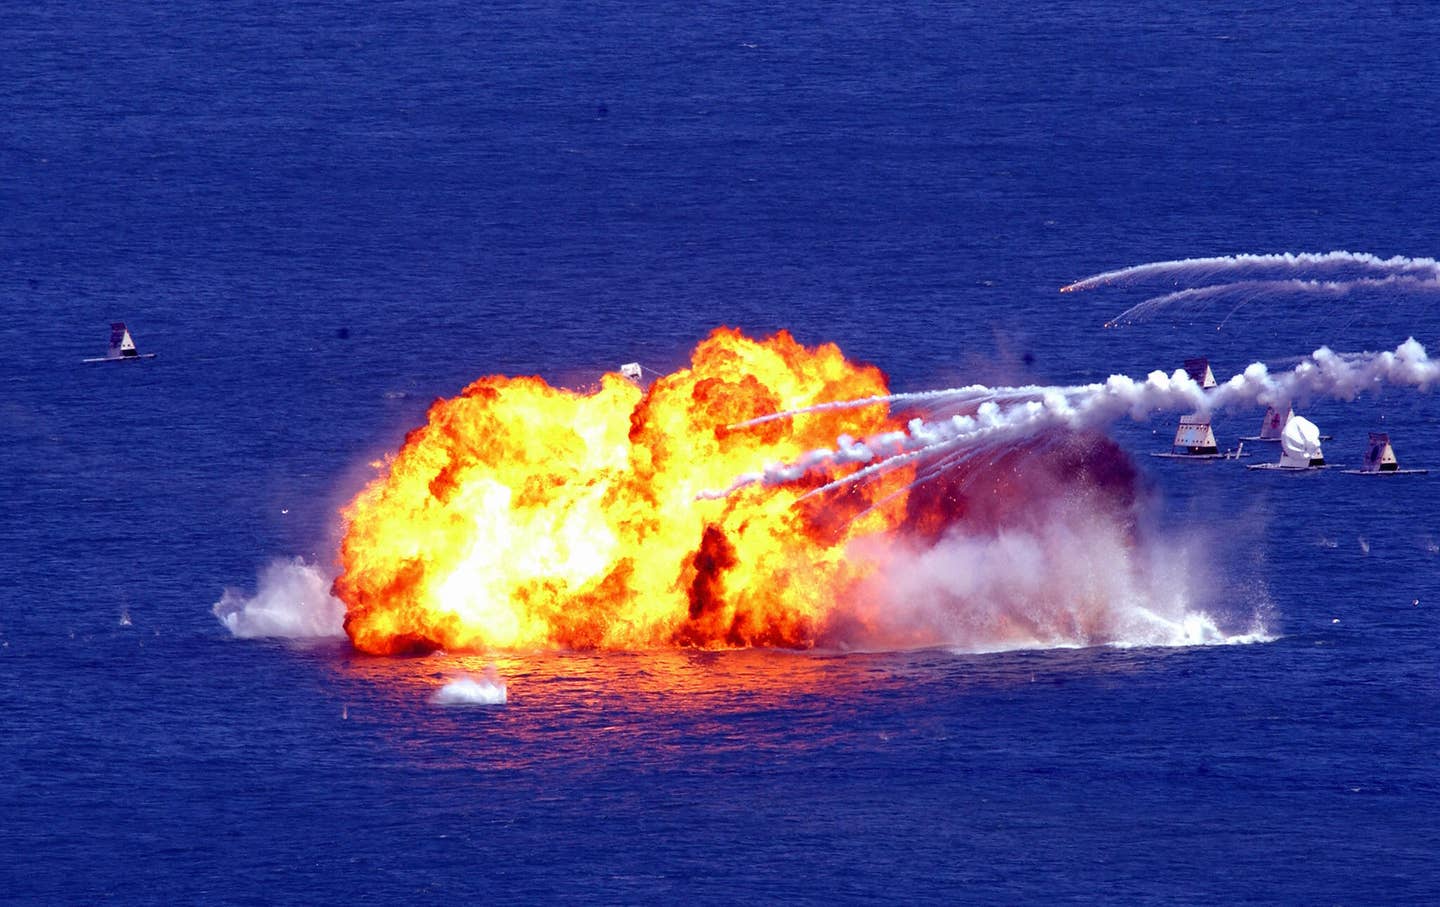 ROCAF F-5Es (out of picture) drop napalm tanks on mock targets at sea in simulated wargames off Li Tse Chien, northeastern Ilan county, in September 2003. <em>SAM YEH/AFP via Getty Images</em>